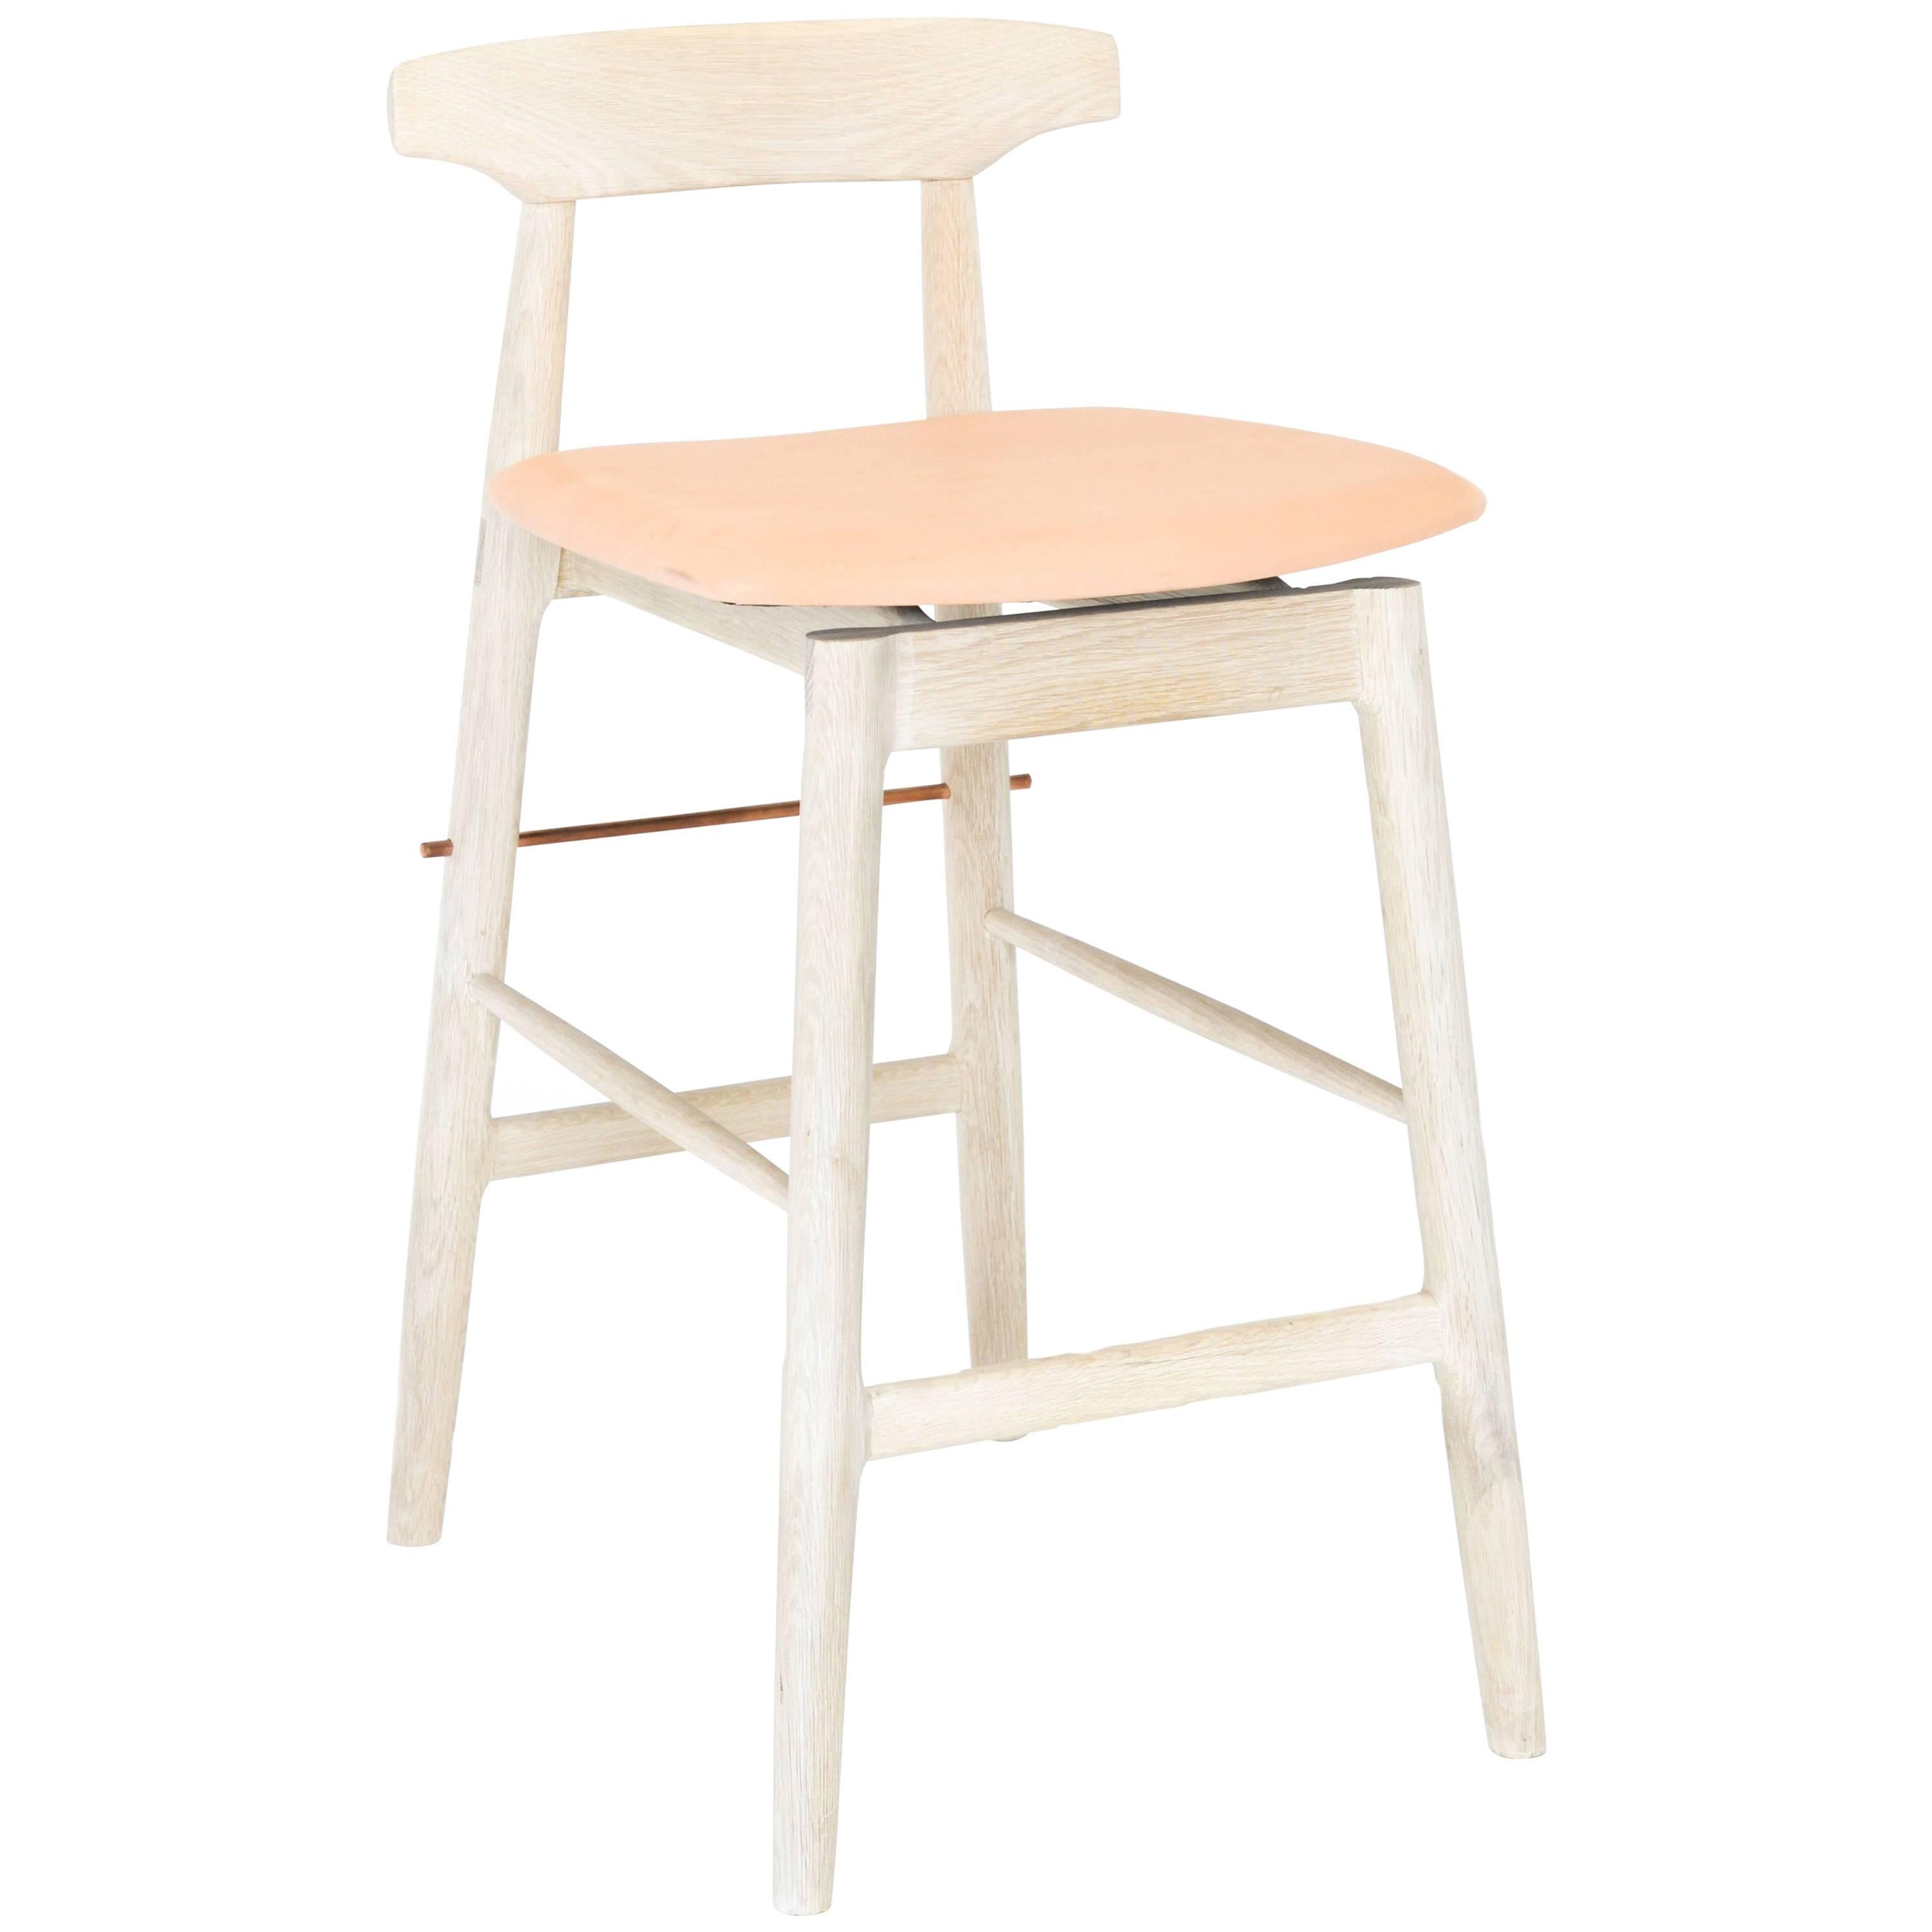 White Oak, Veg Tan and Copper Wood High Stool For Sale